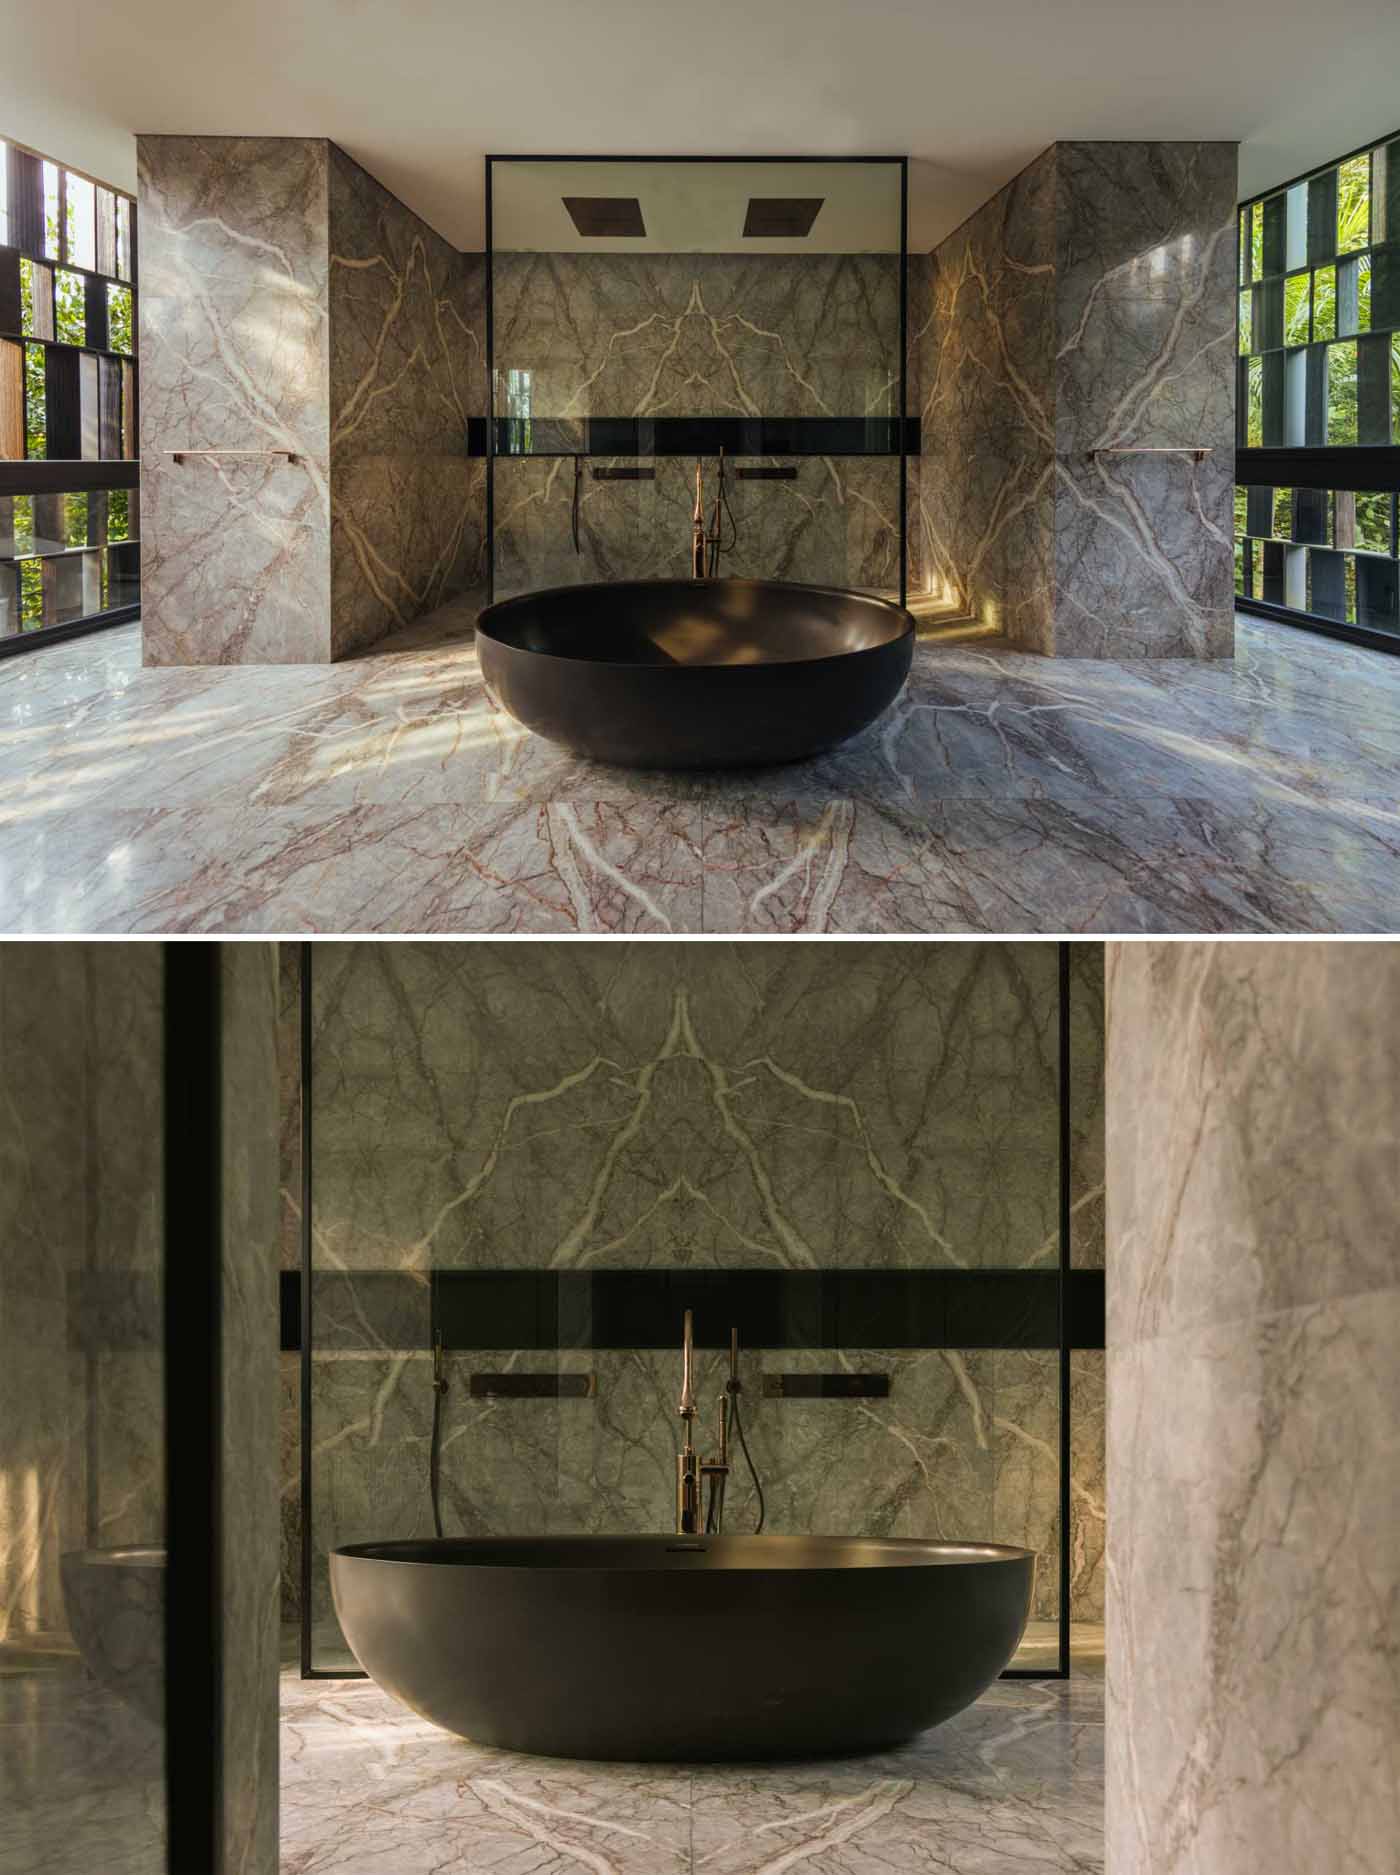 A modern bathroom with a black freestanding bathtub and a walk-in double shower.